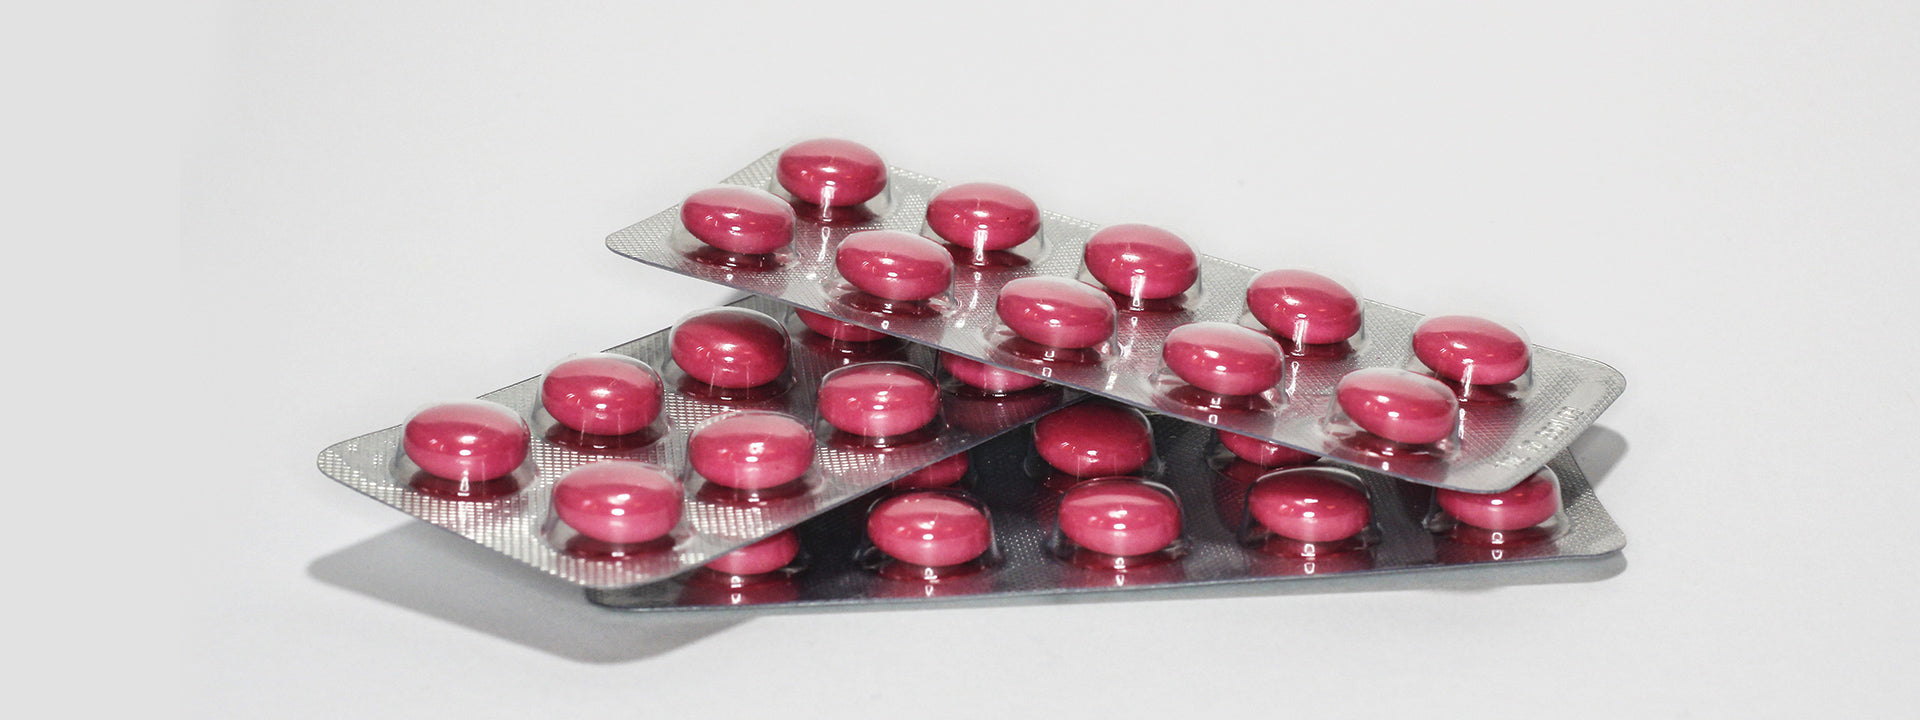 Vitamin K2 and Statins: New Research Shows Statins Harmful